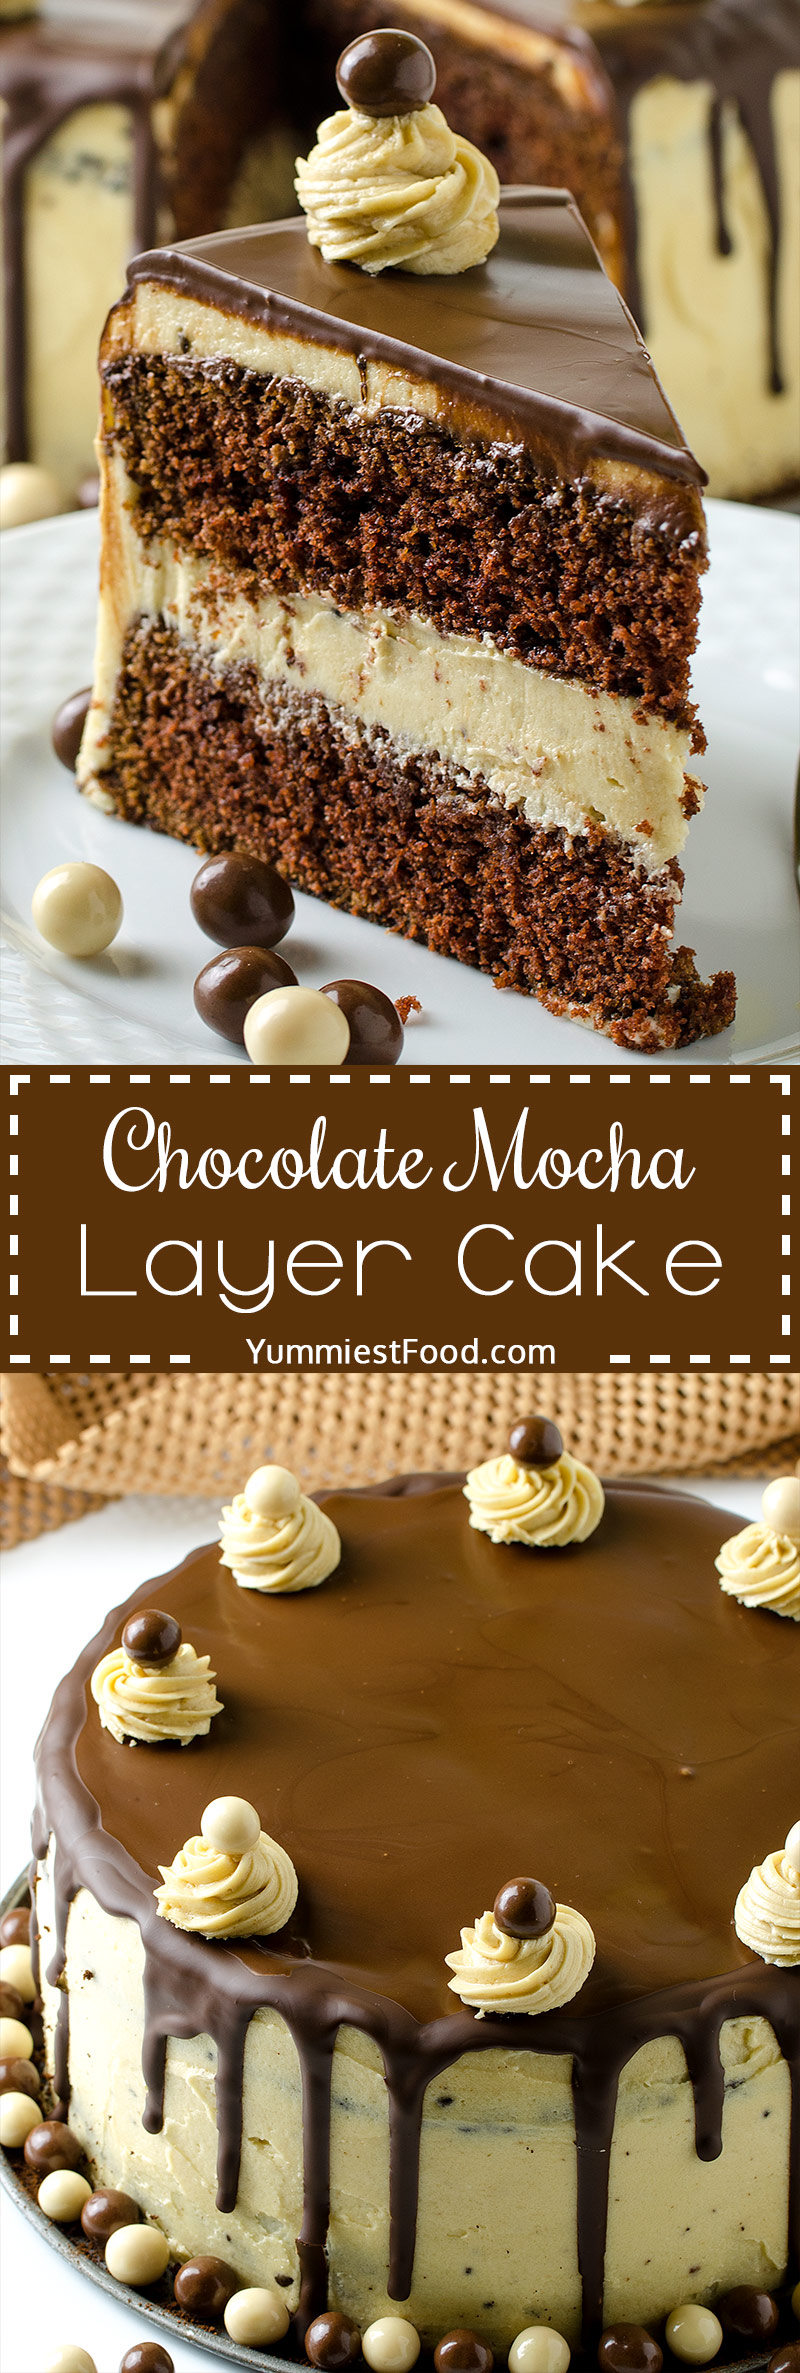 CHOCOLATE MOCHA LAYER CAKE – Rich and delicious chocolate cake with perfect mocha buttercream! Favorite cup of coffee in cake form a truly decadent treat!